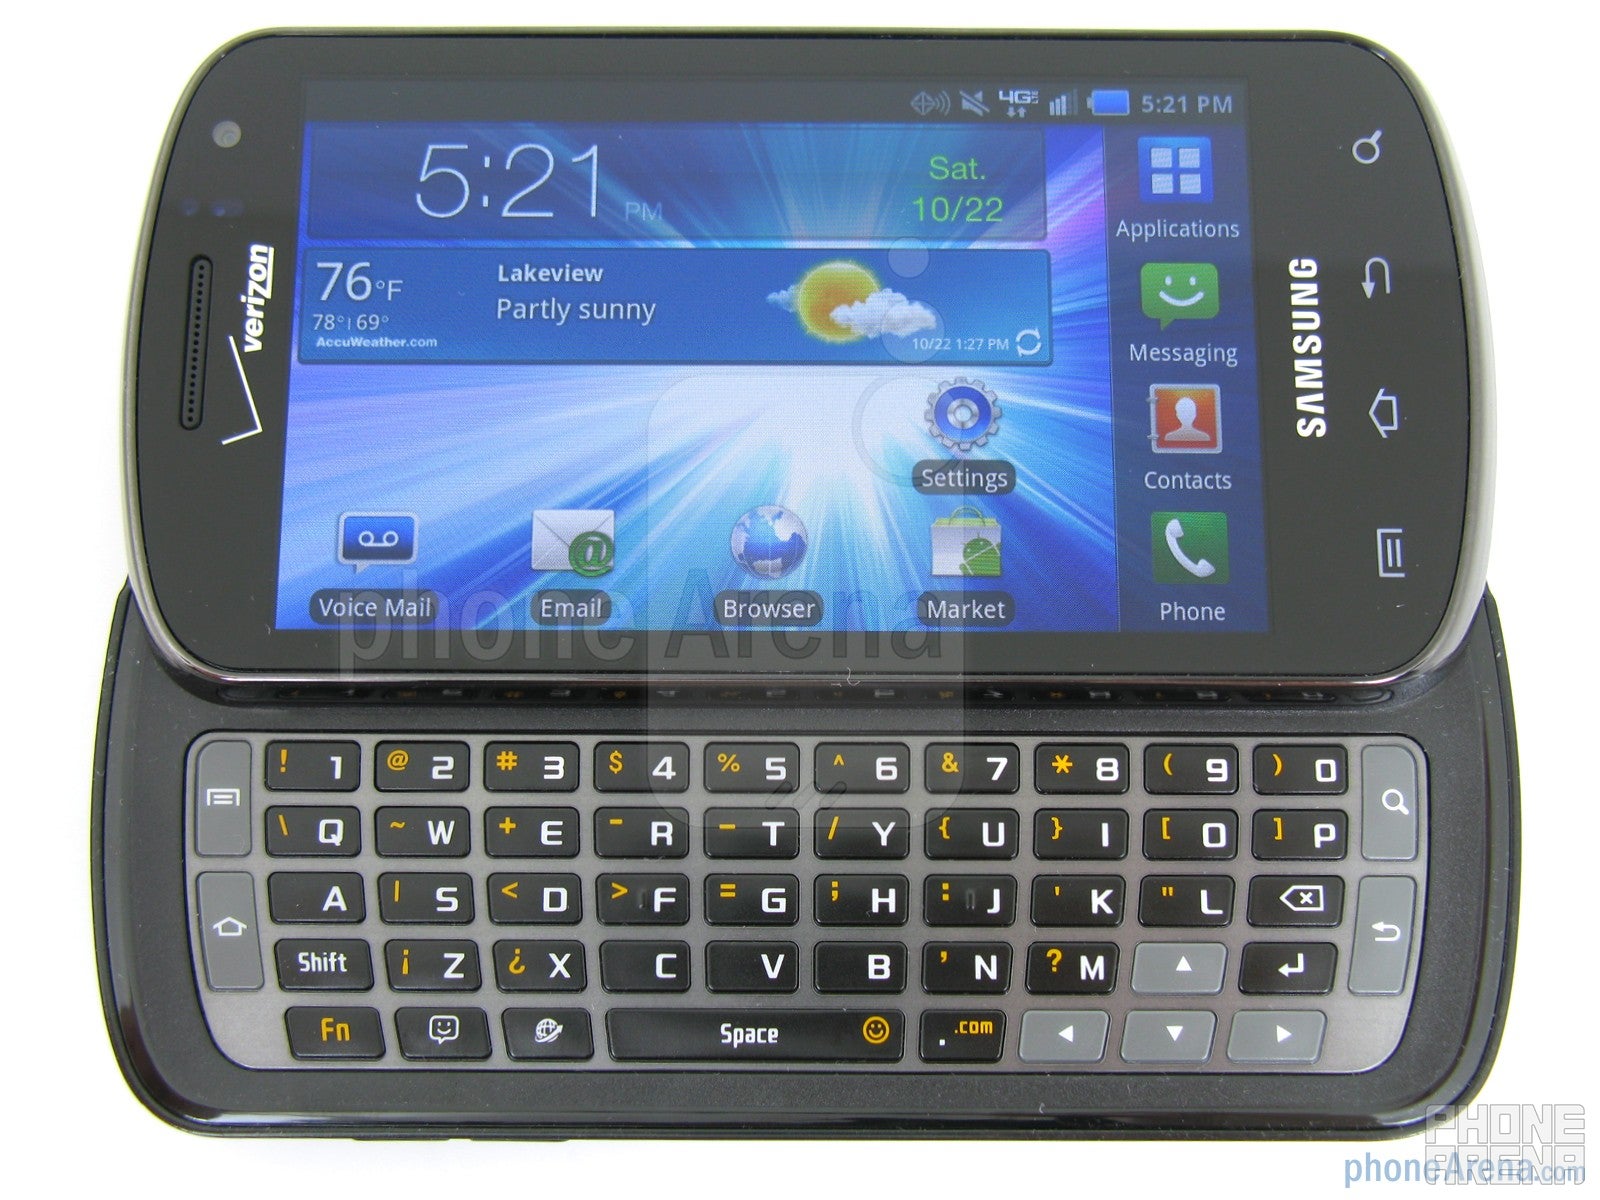 Samsung Stratosphere Review